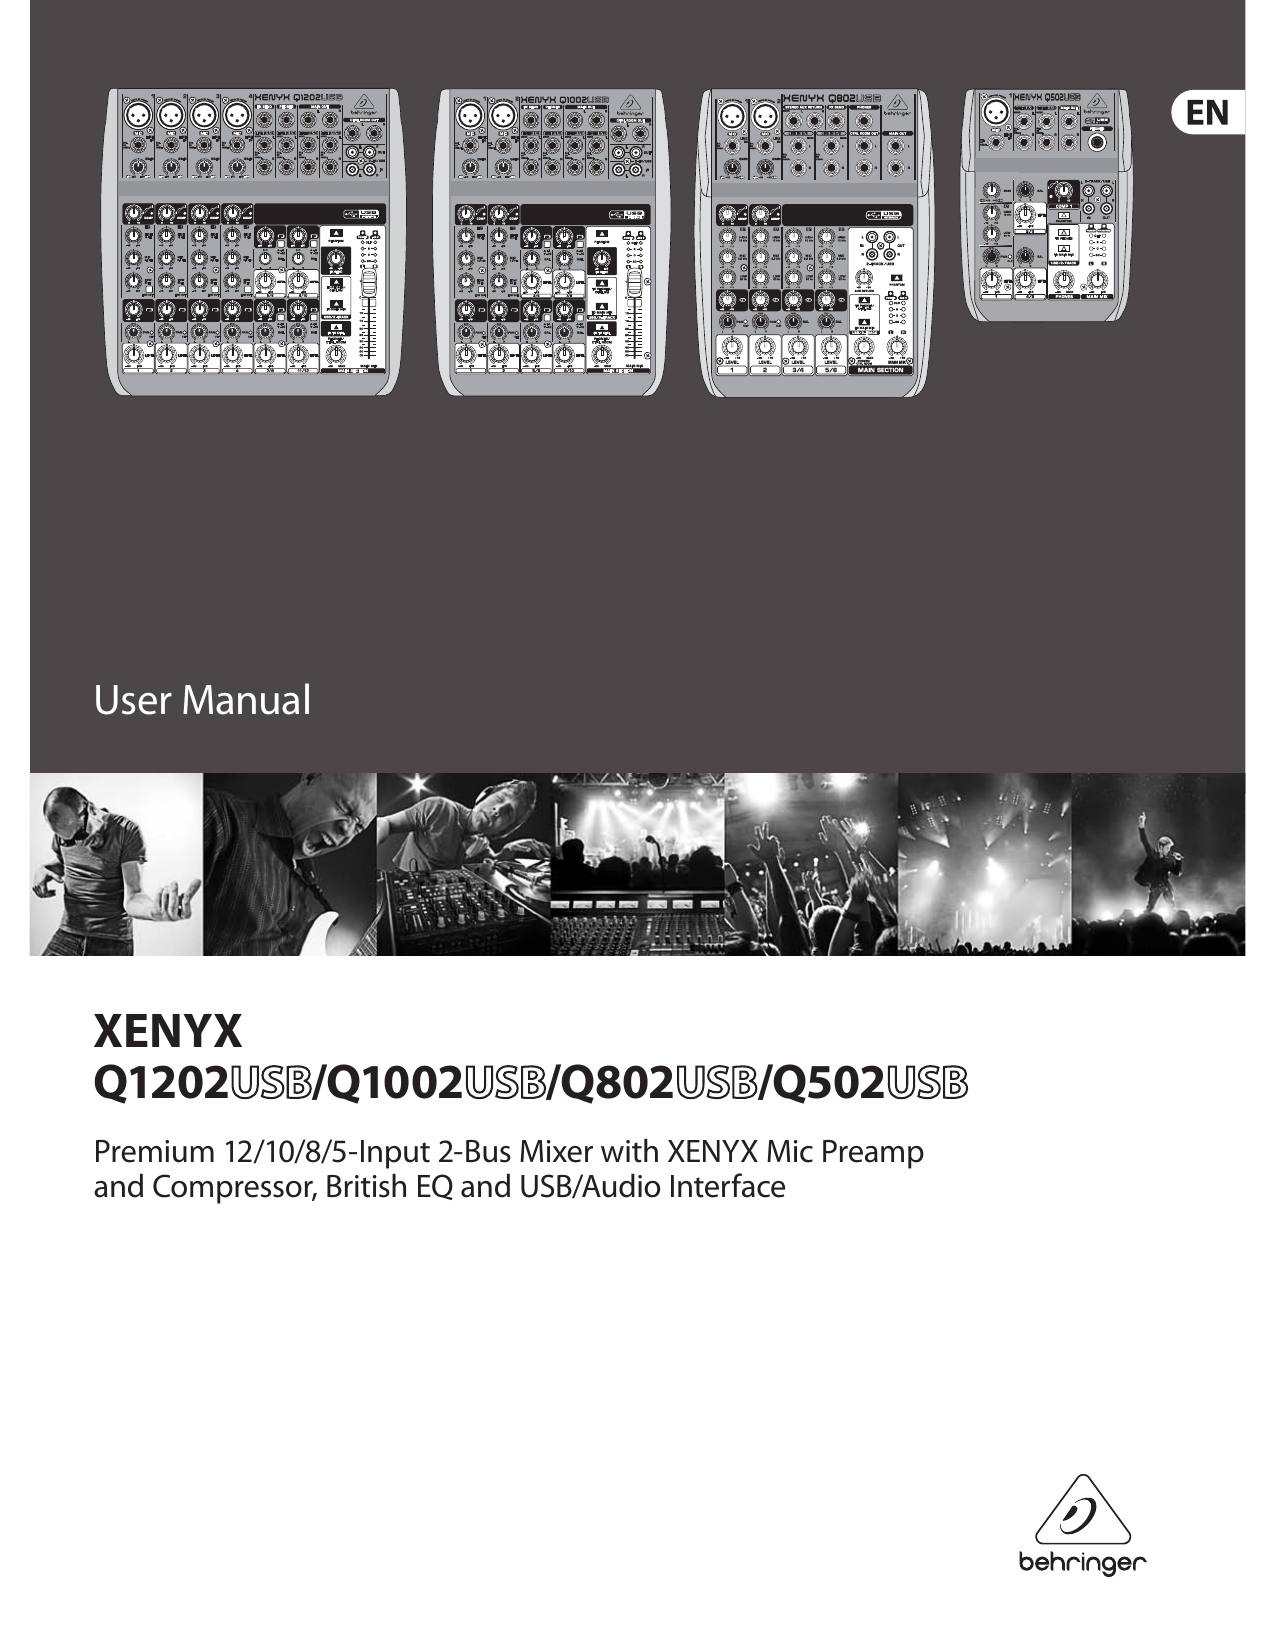 behringer xenyx q802usb phones and mains tied together